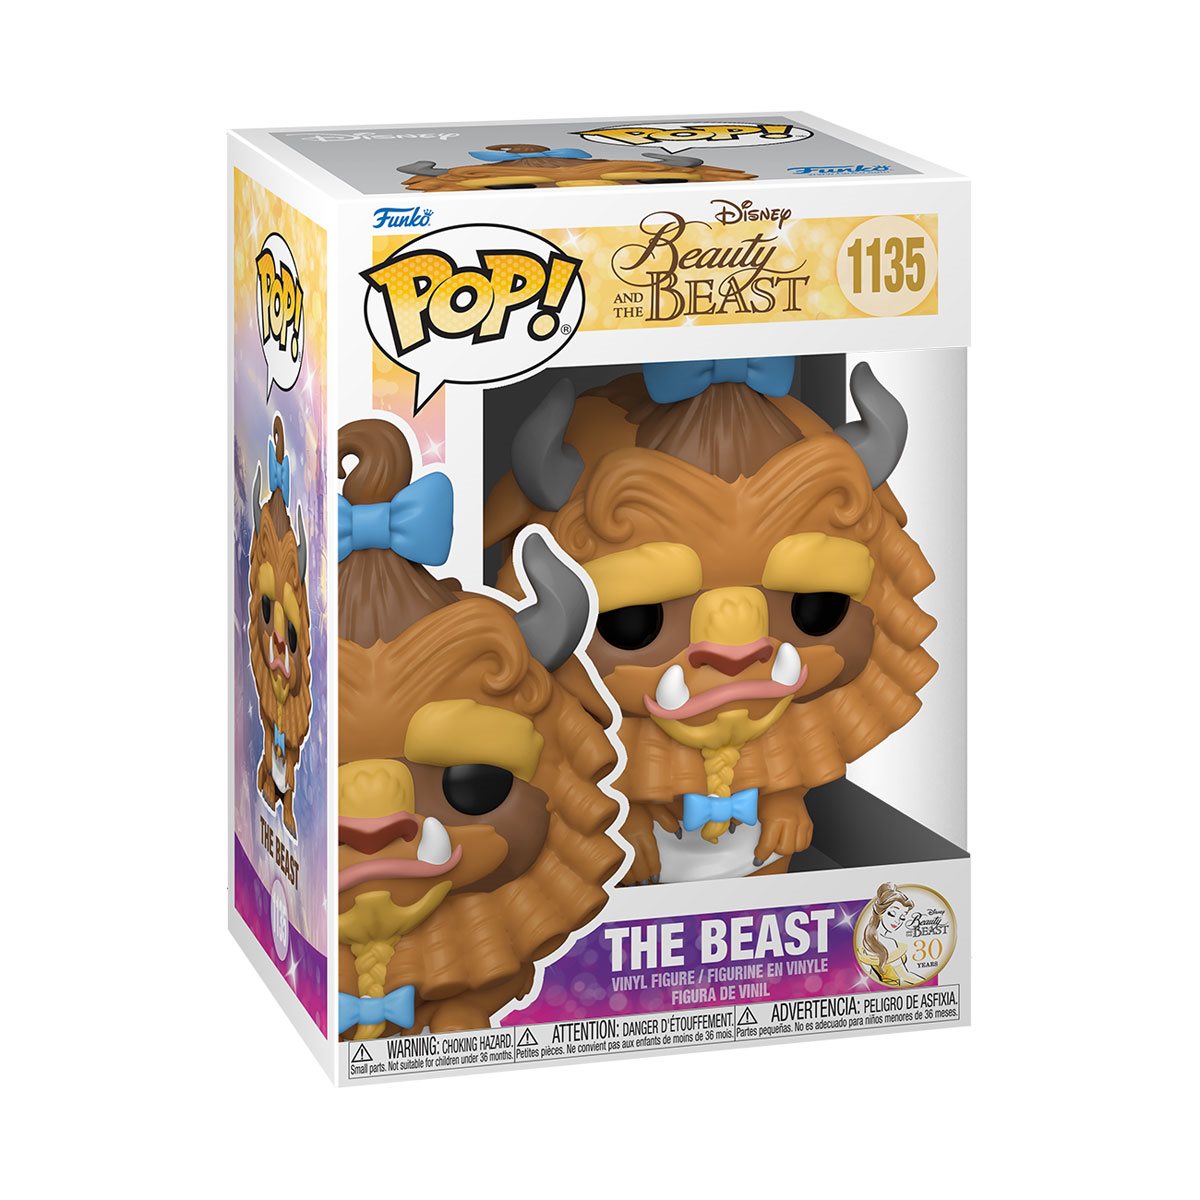 BEAUTY AND THE BEAST THE BEAST WITH CURLS POP! VINYL FIGURE